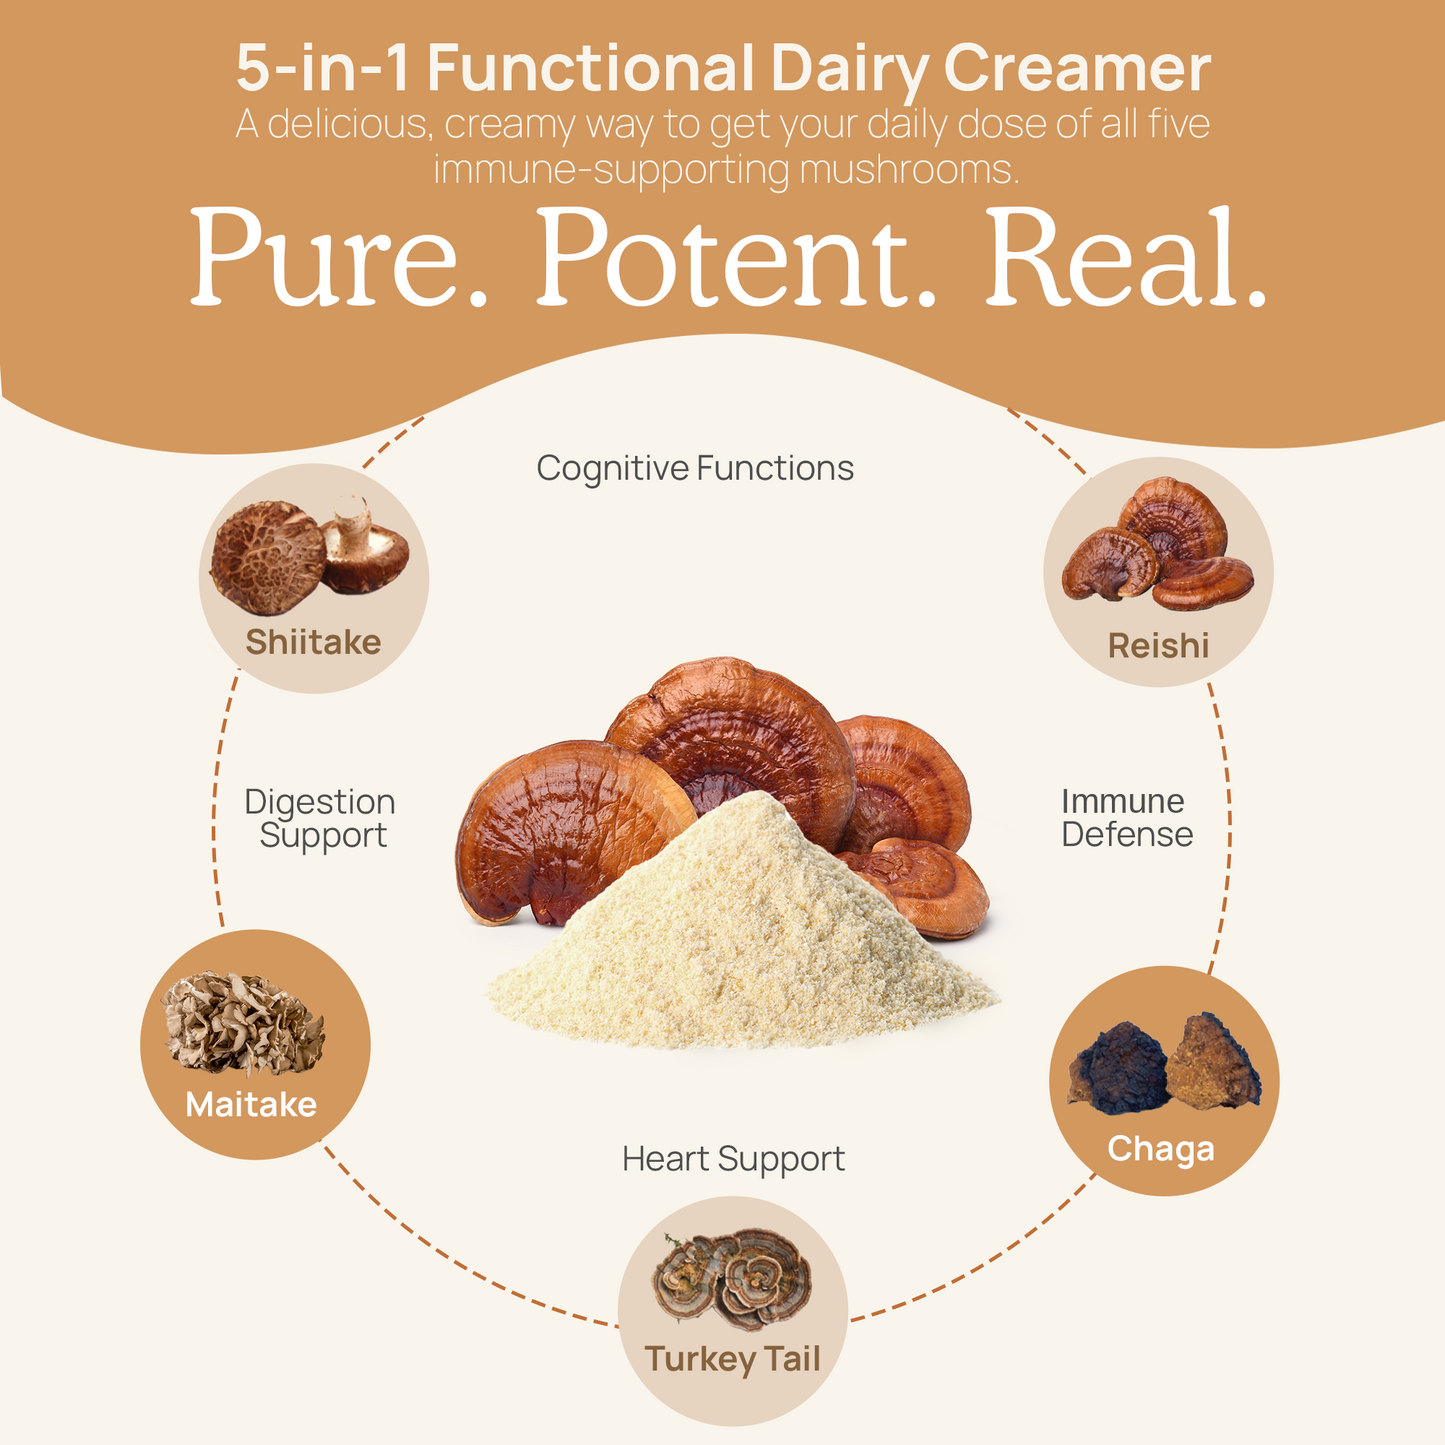 Infographic of a Real Mushrooms USDA Certified Organic 5-in-1 mushroom dairy creamer, highlighting benefits with images of shiitake, reishi, maitake, and turkey tail mushrooms and their